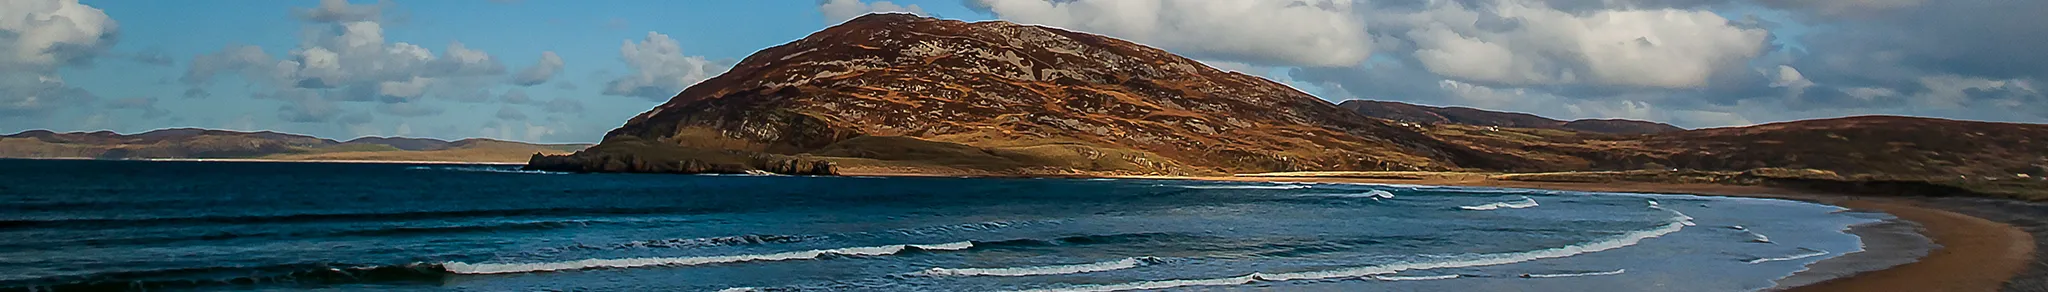 Photo showing: A view of Tullagh Strand, Donegal, Ireland